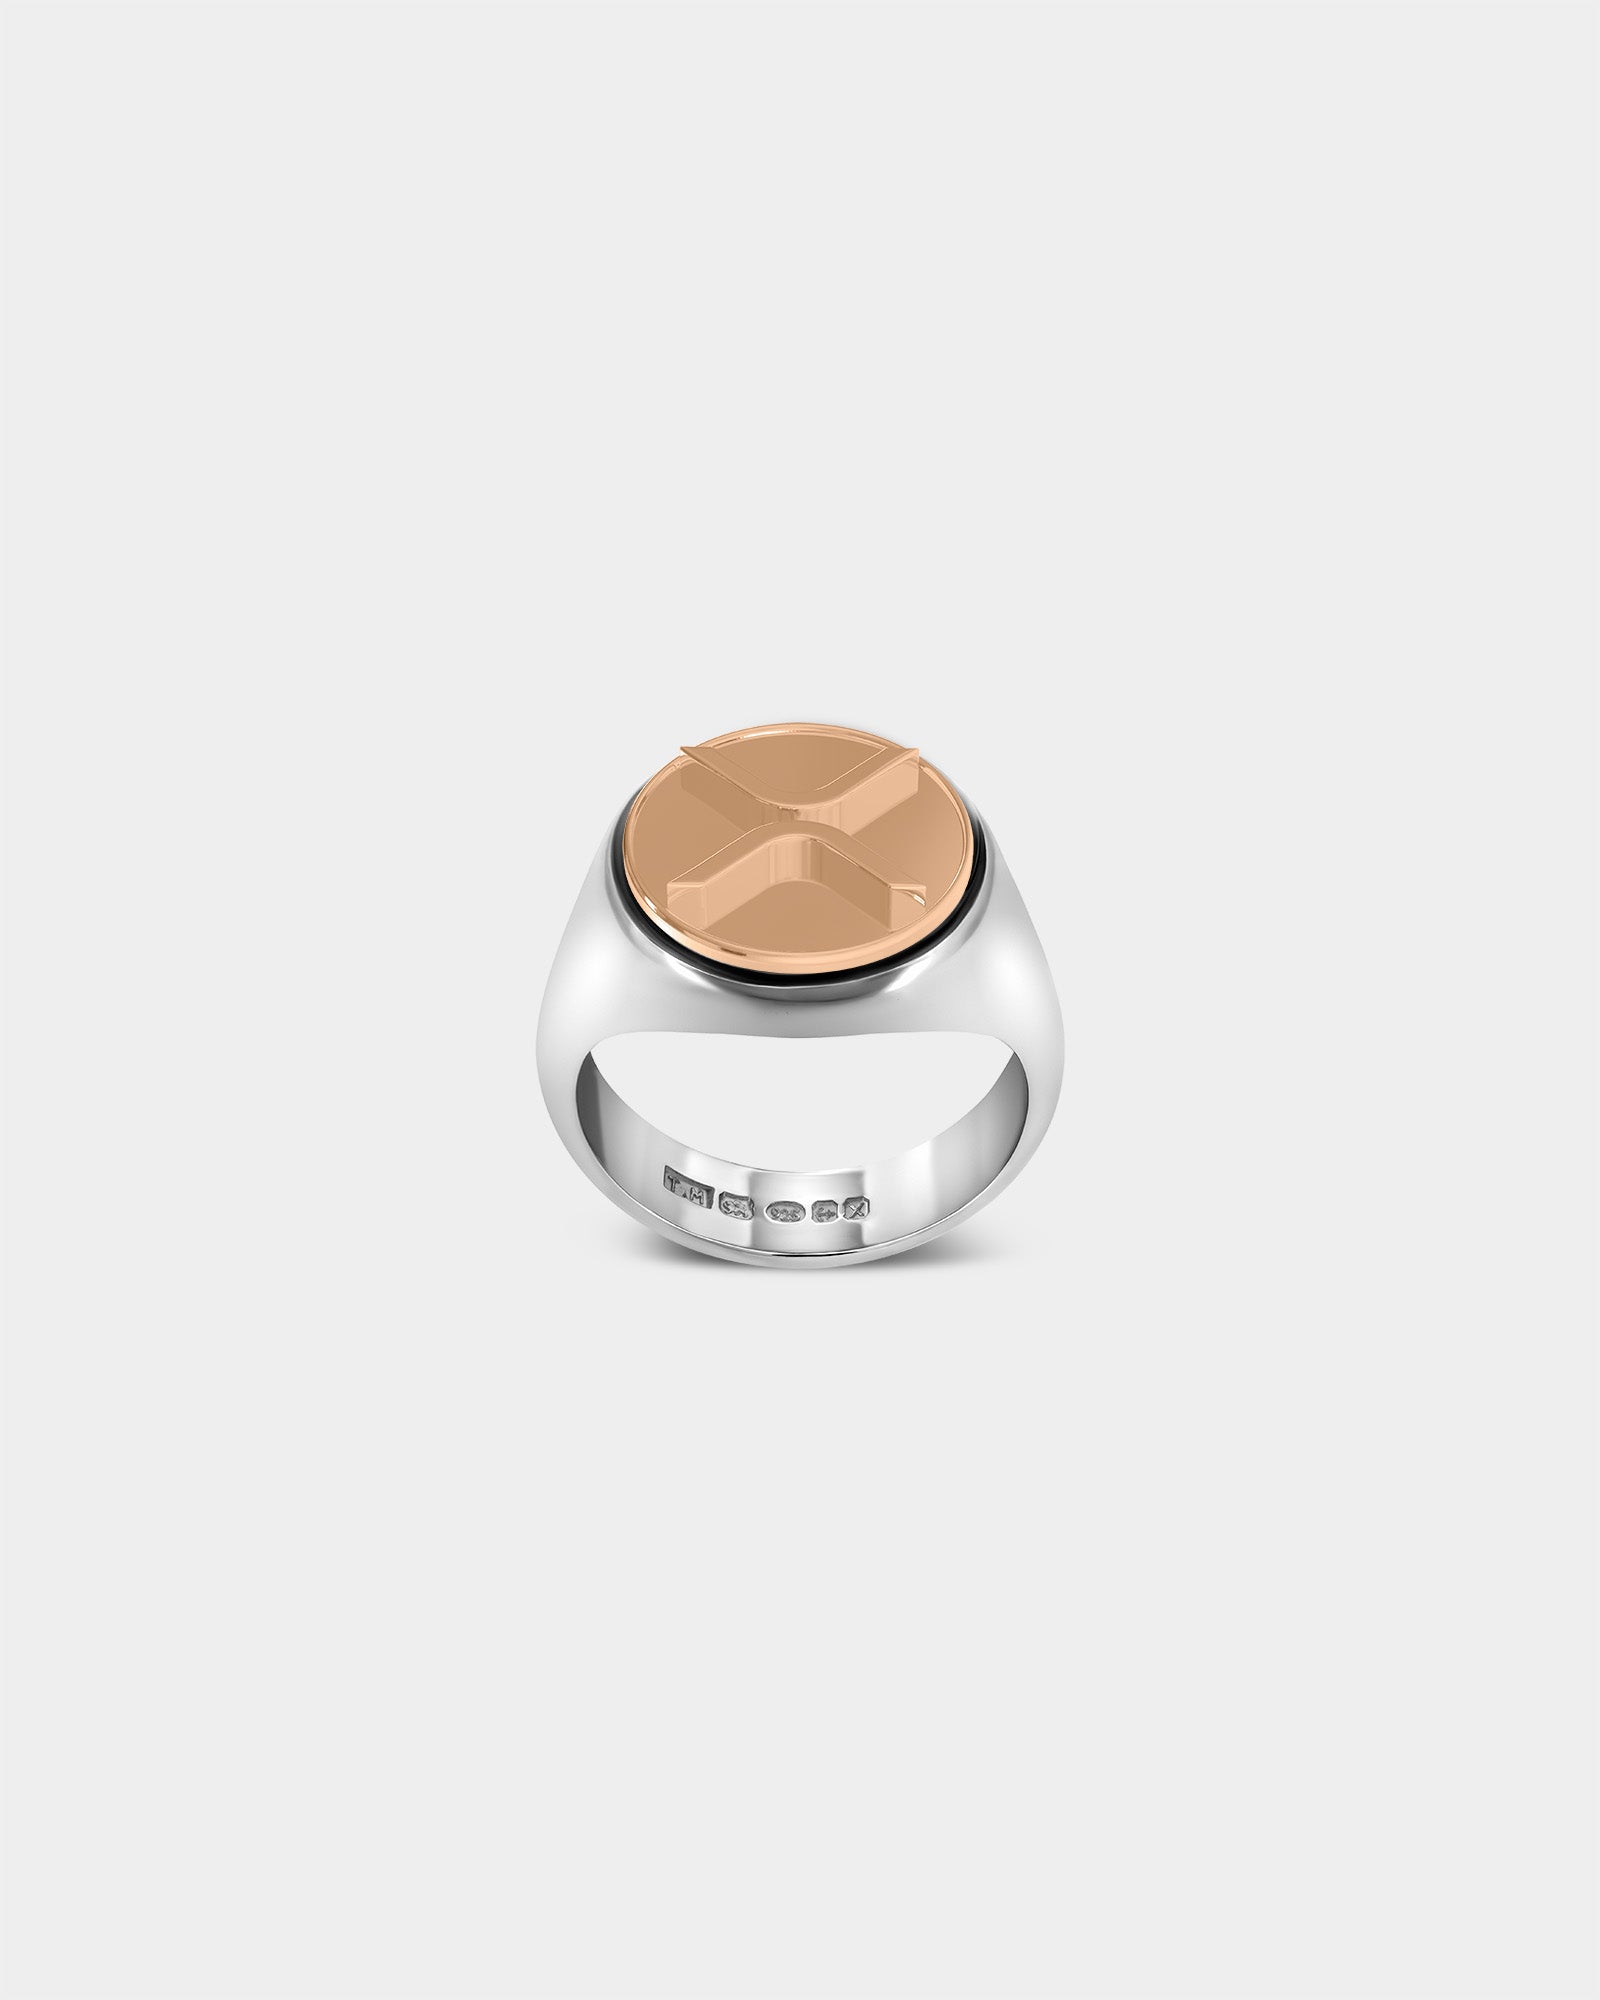 Large Ripple XRP Crypto Ring in Sterling Silver / 9k Rose Gold by Wilson Grant